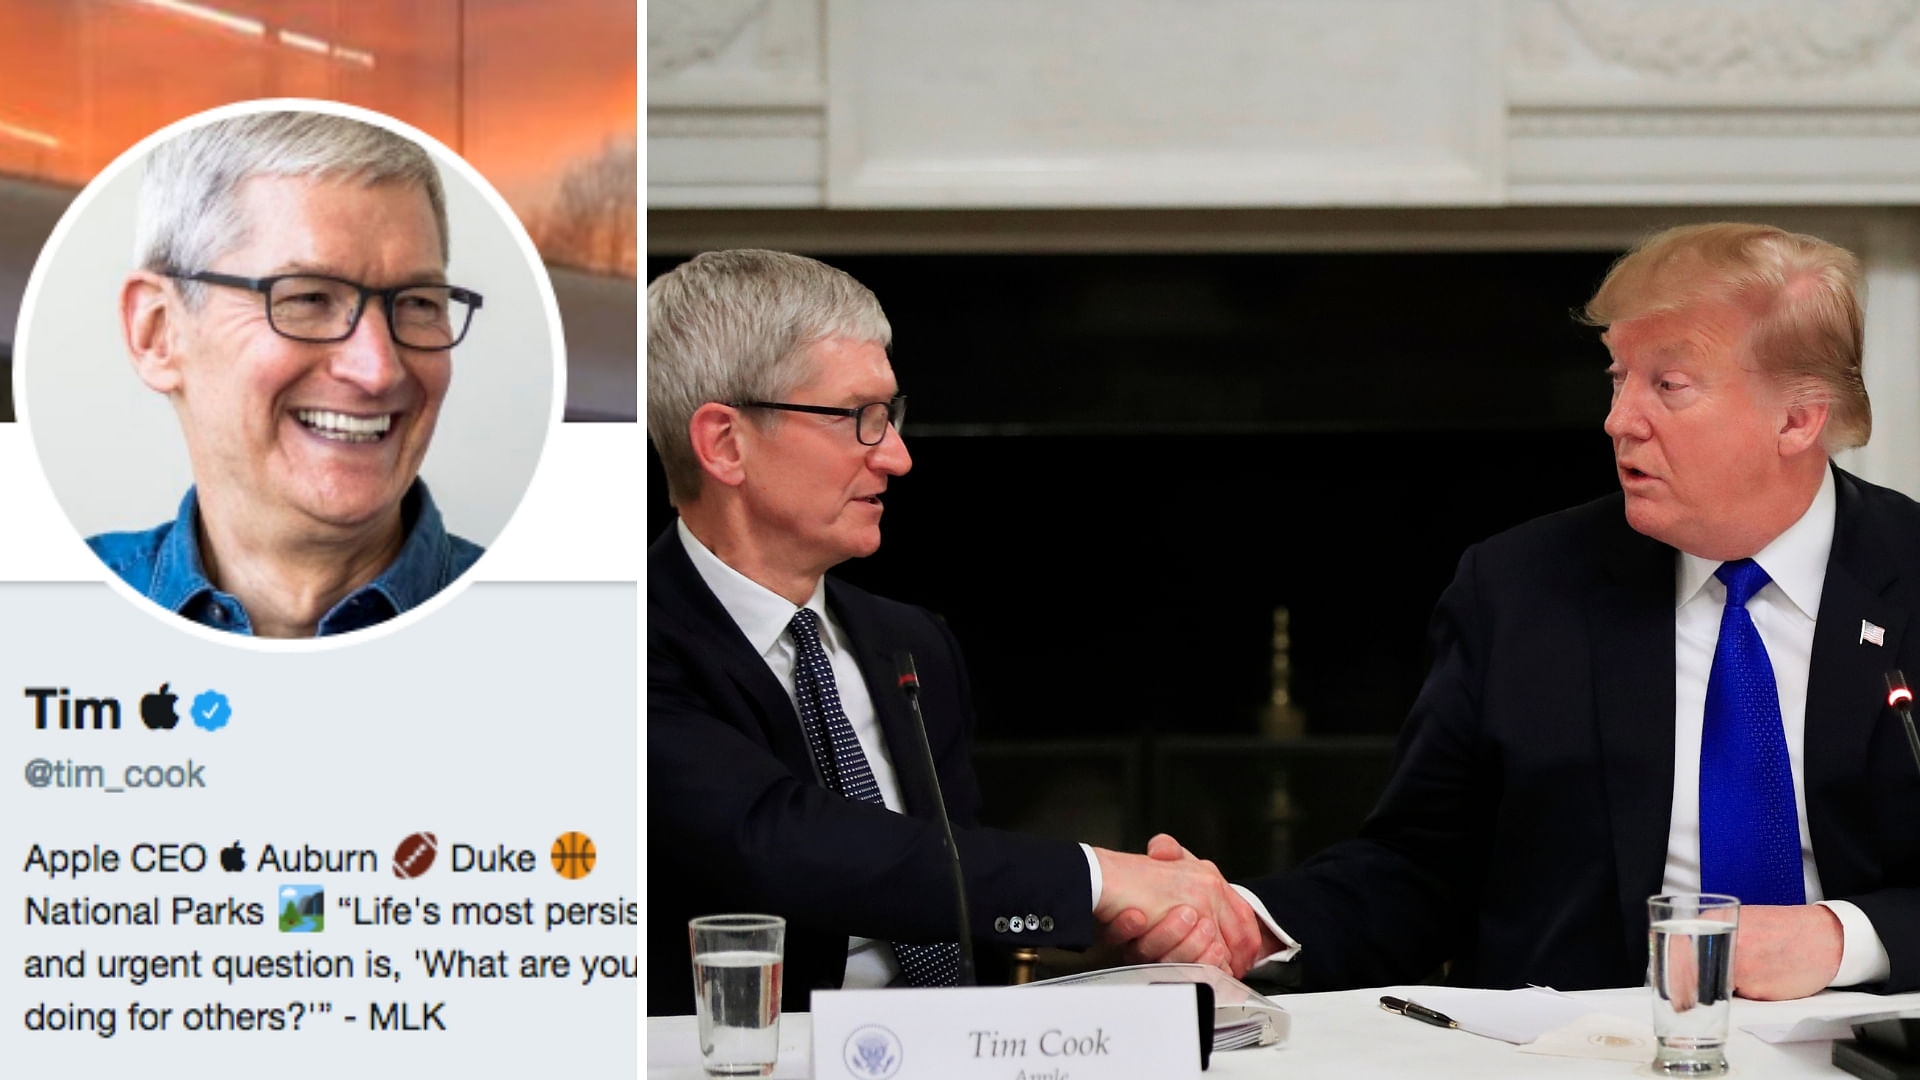 Trump while referring to the CEO of Apple Inc, Tim Cook called the Apple CEO ‘Tim Apple.’